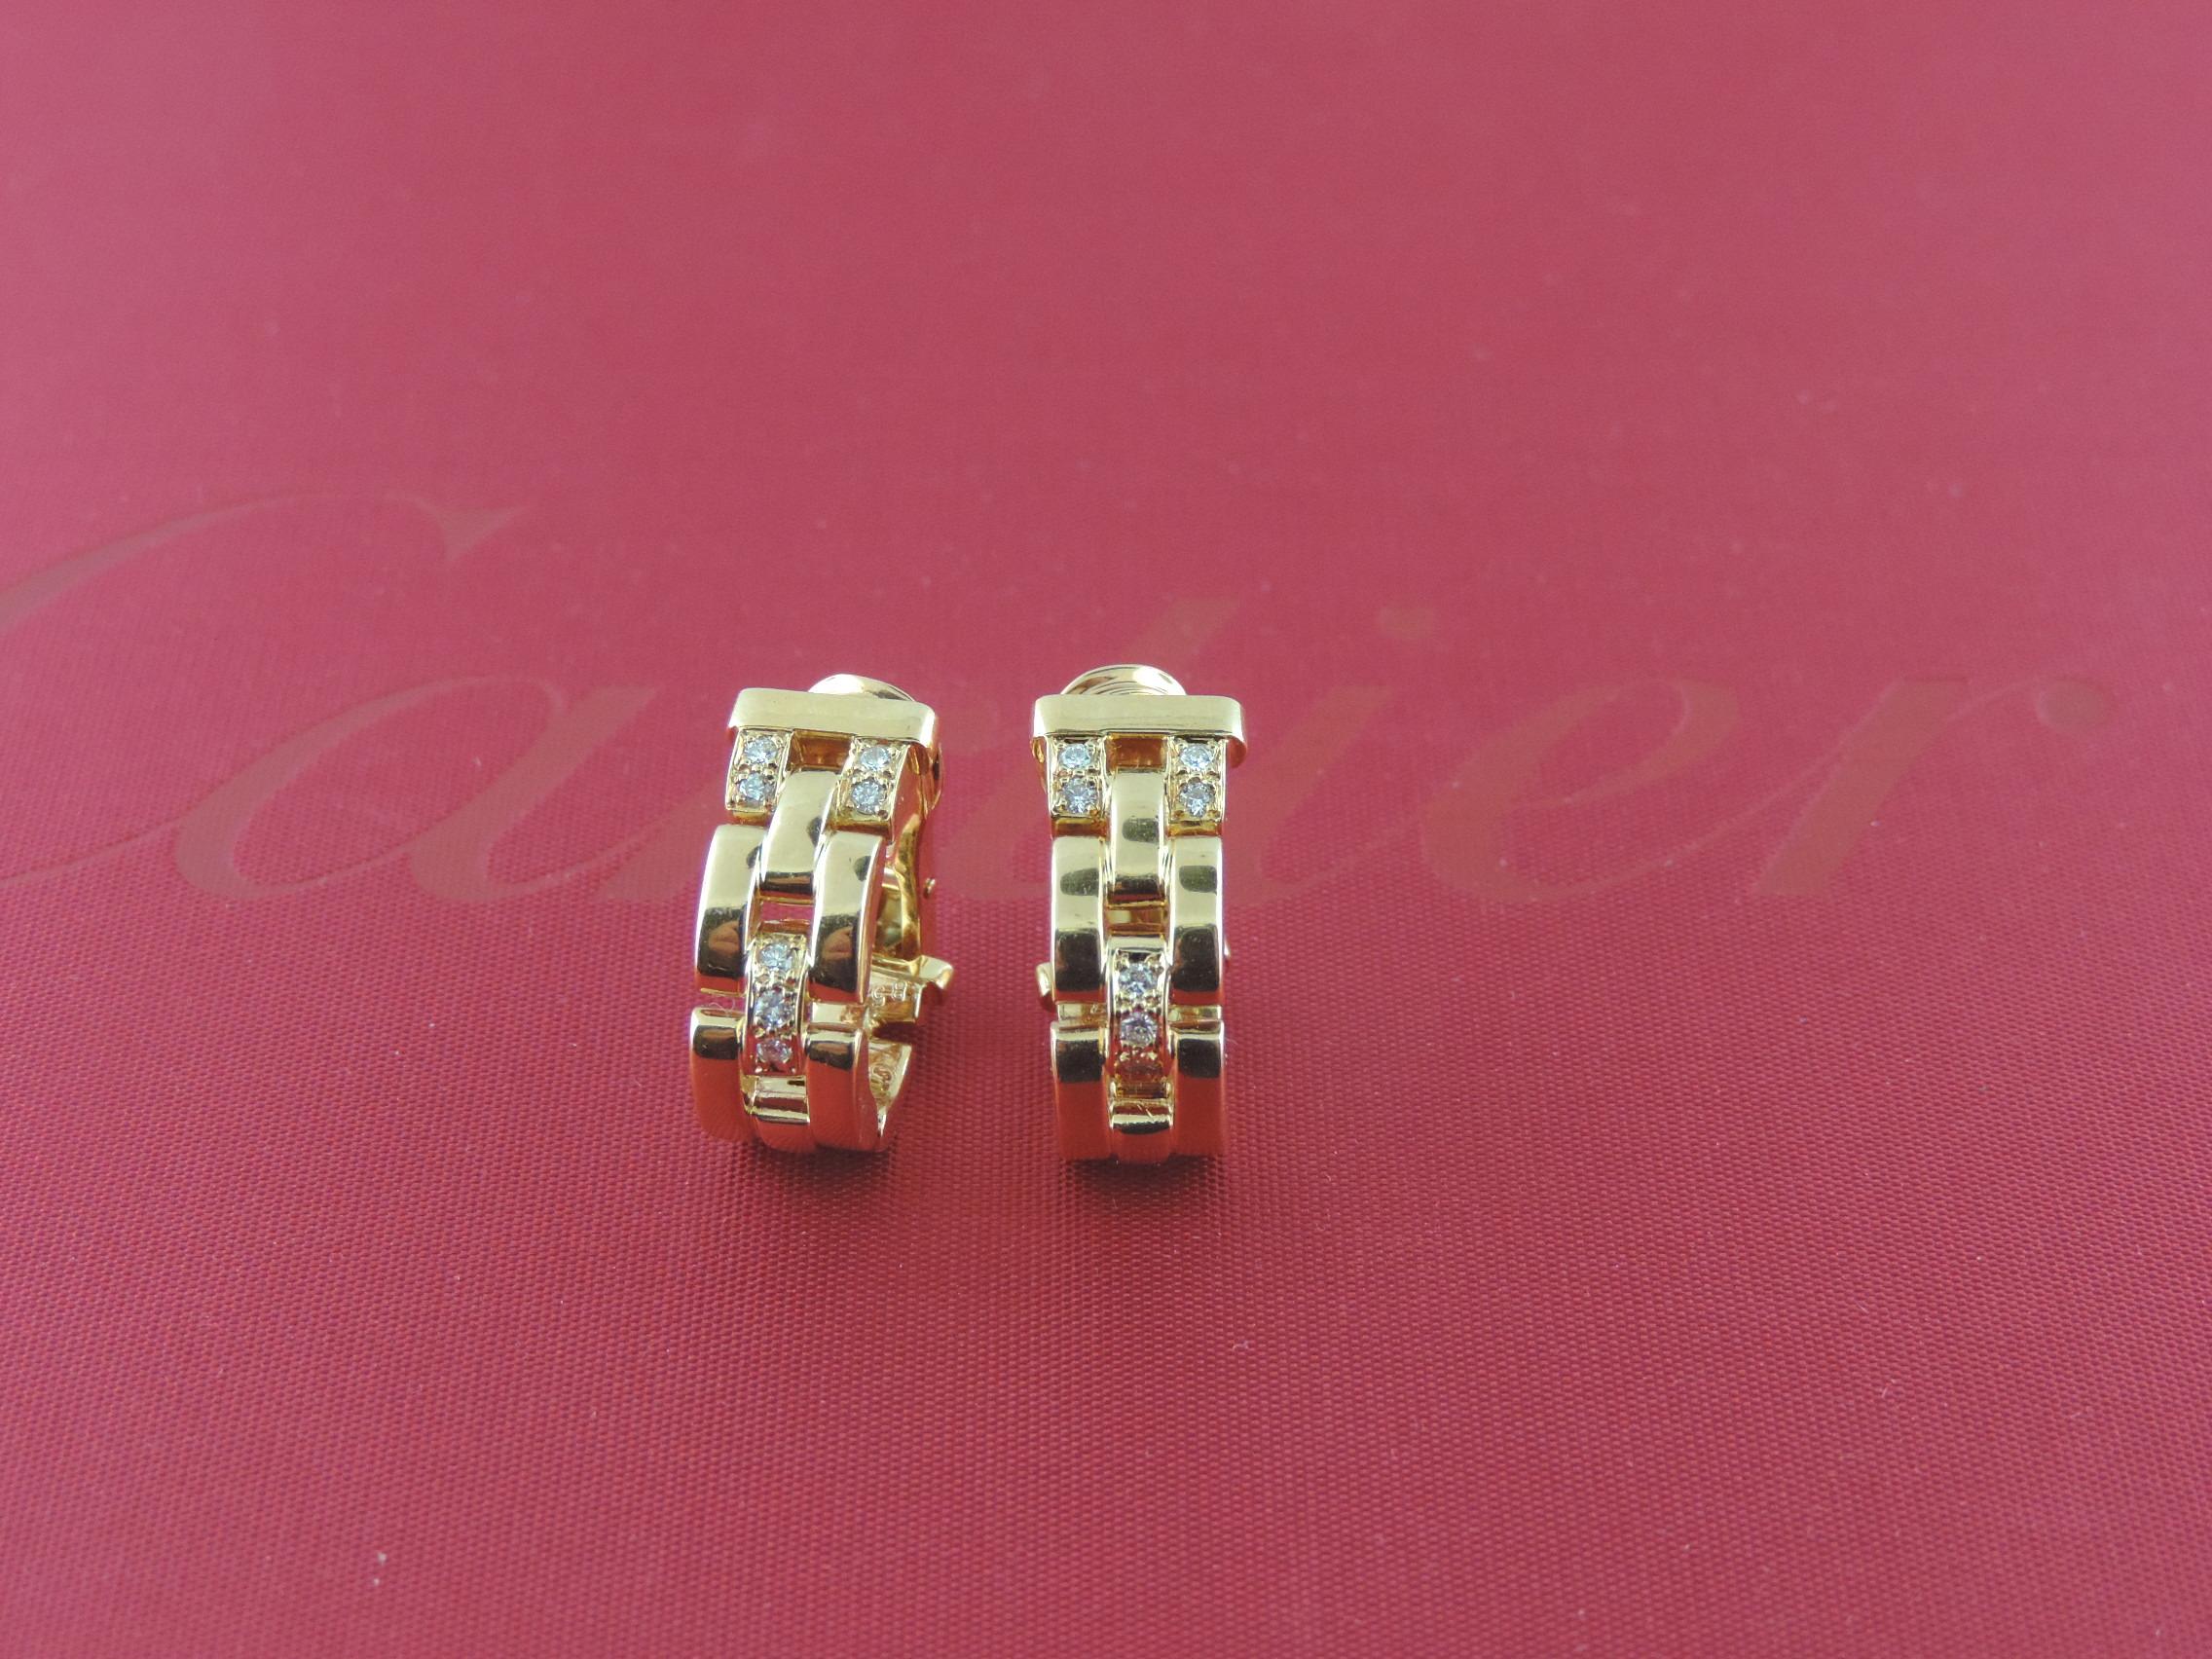 Cartier 18 Karat Yellow Gold Maillon Panthere Diamond Earrings In Excellent Condition For Sale In Ft. Lauderdale, FL